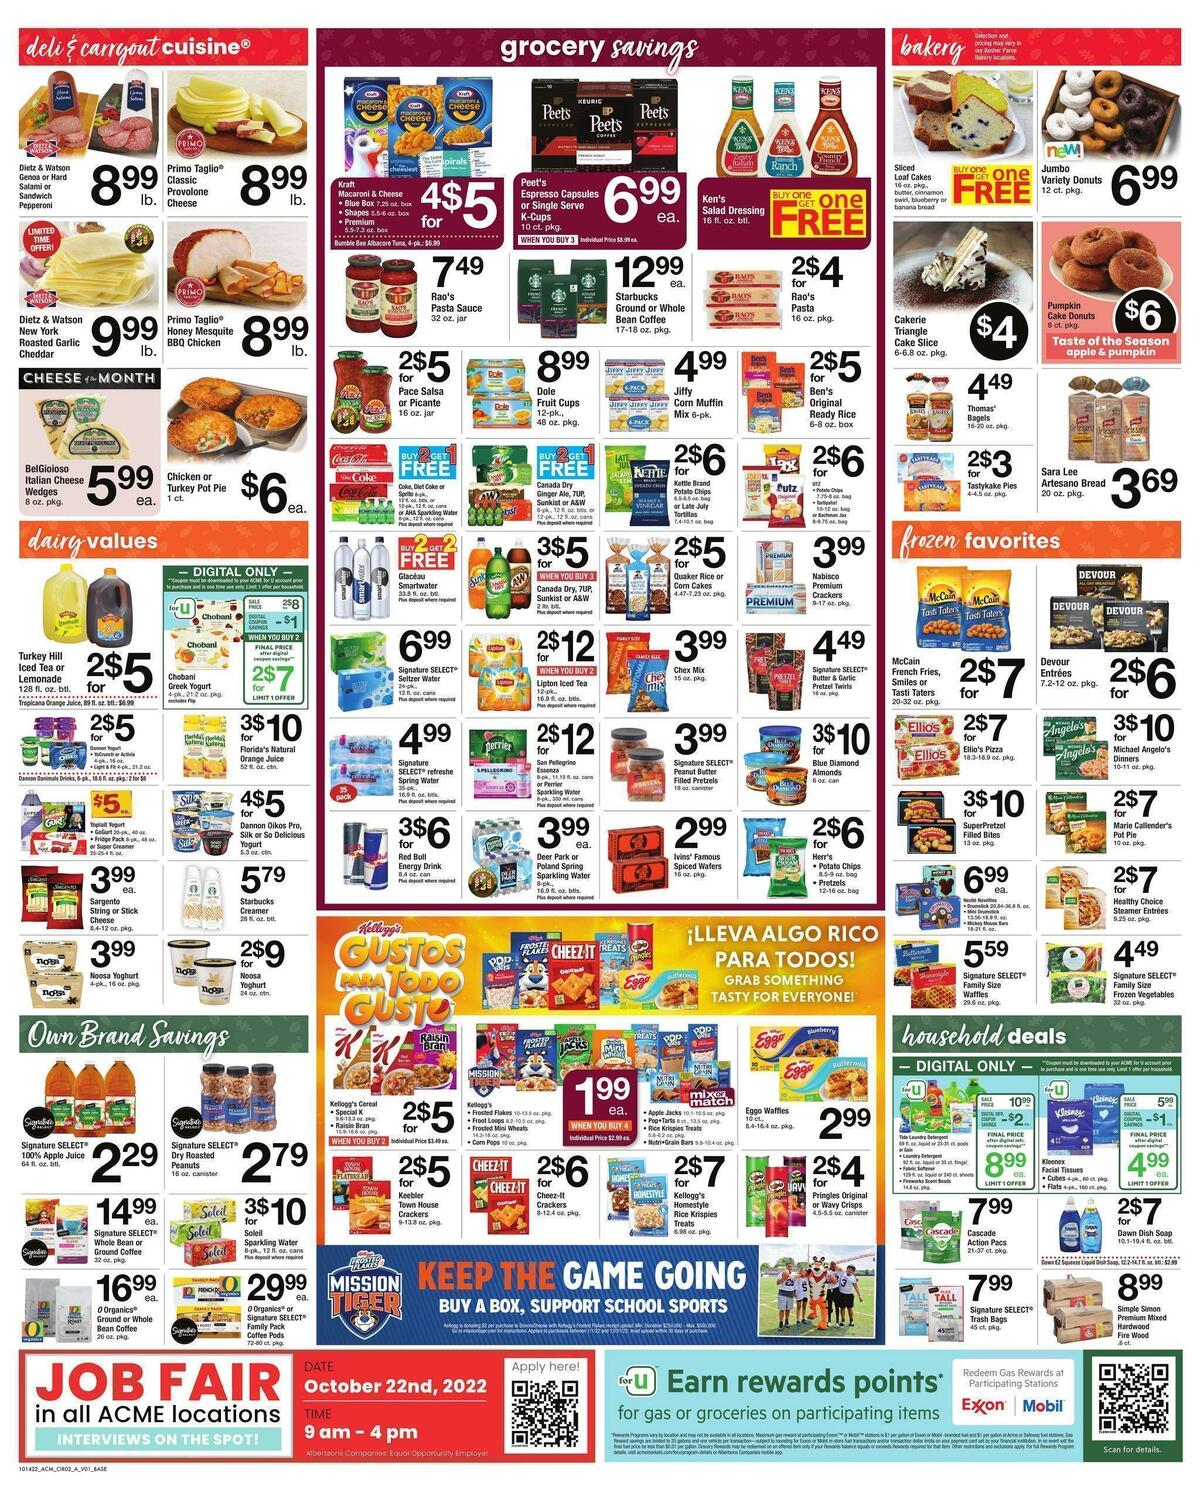 ACME Markets Weekly Ad from October 14